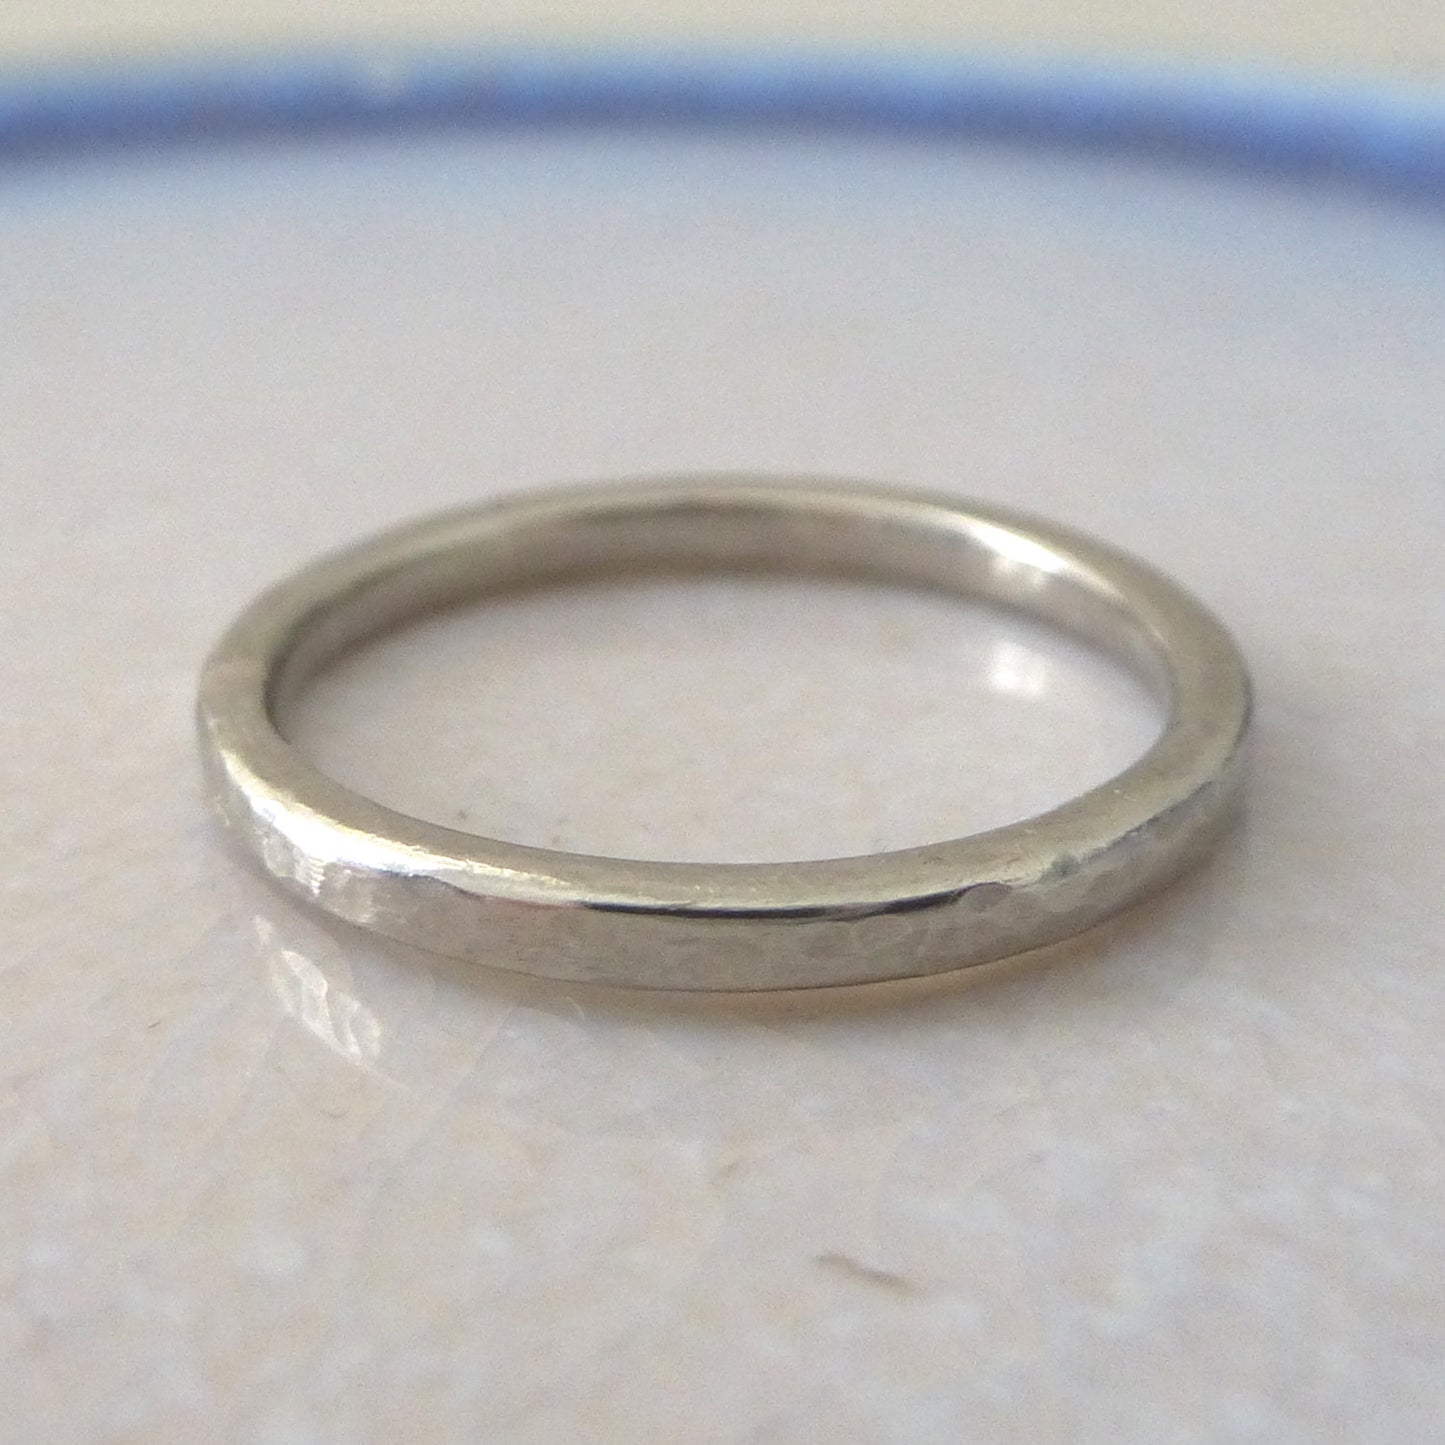 Elegant Band Ring in 18ct White Gold - 2mm - Hammered or Smooth